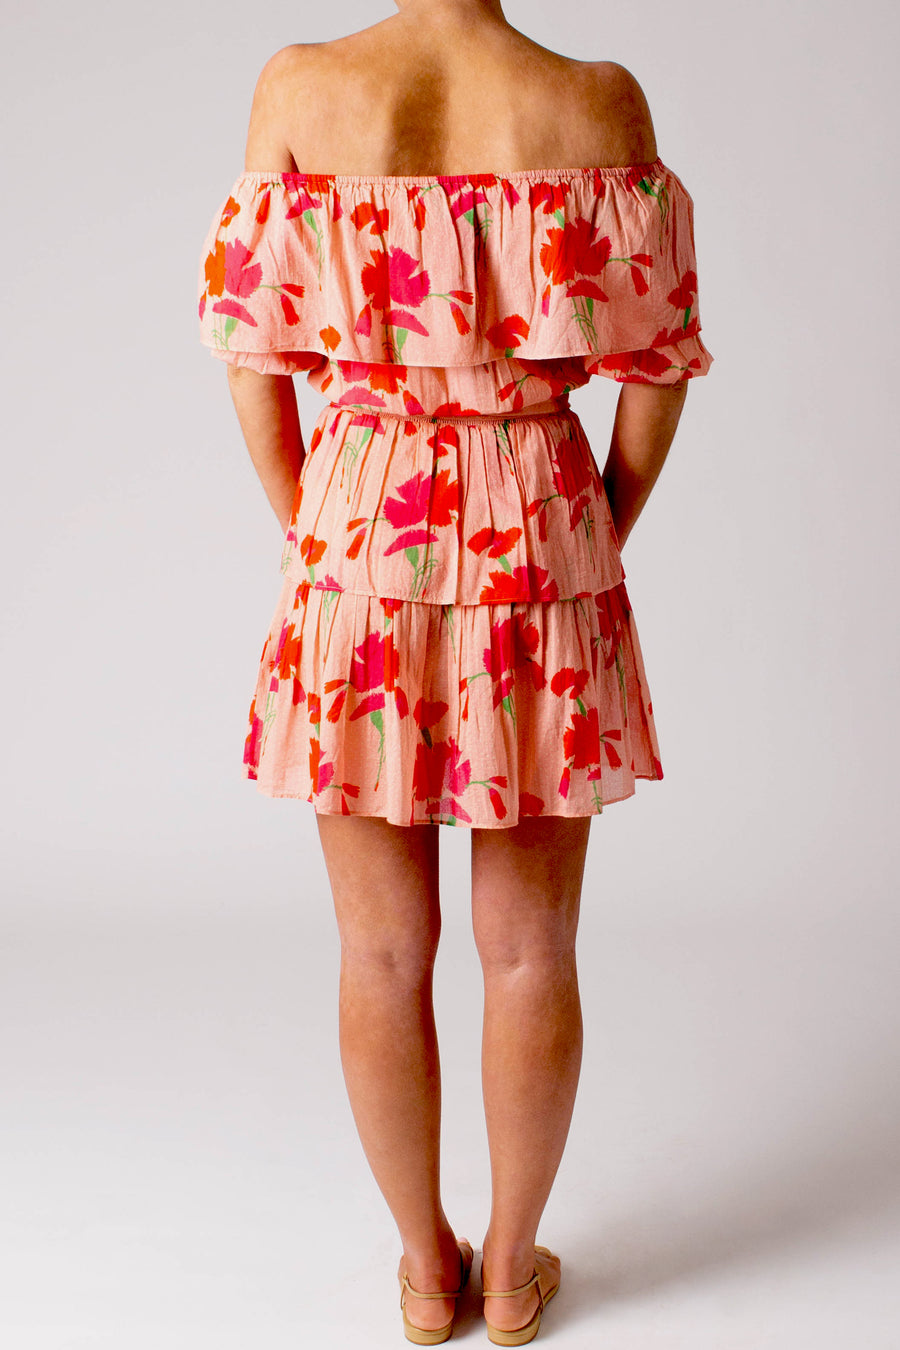 This is a photo of a woman facing backwards wearing a light pink floral dress.